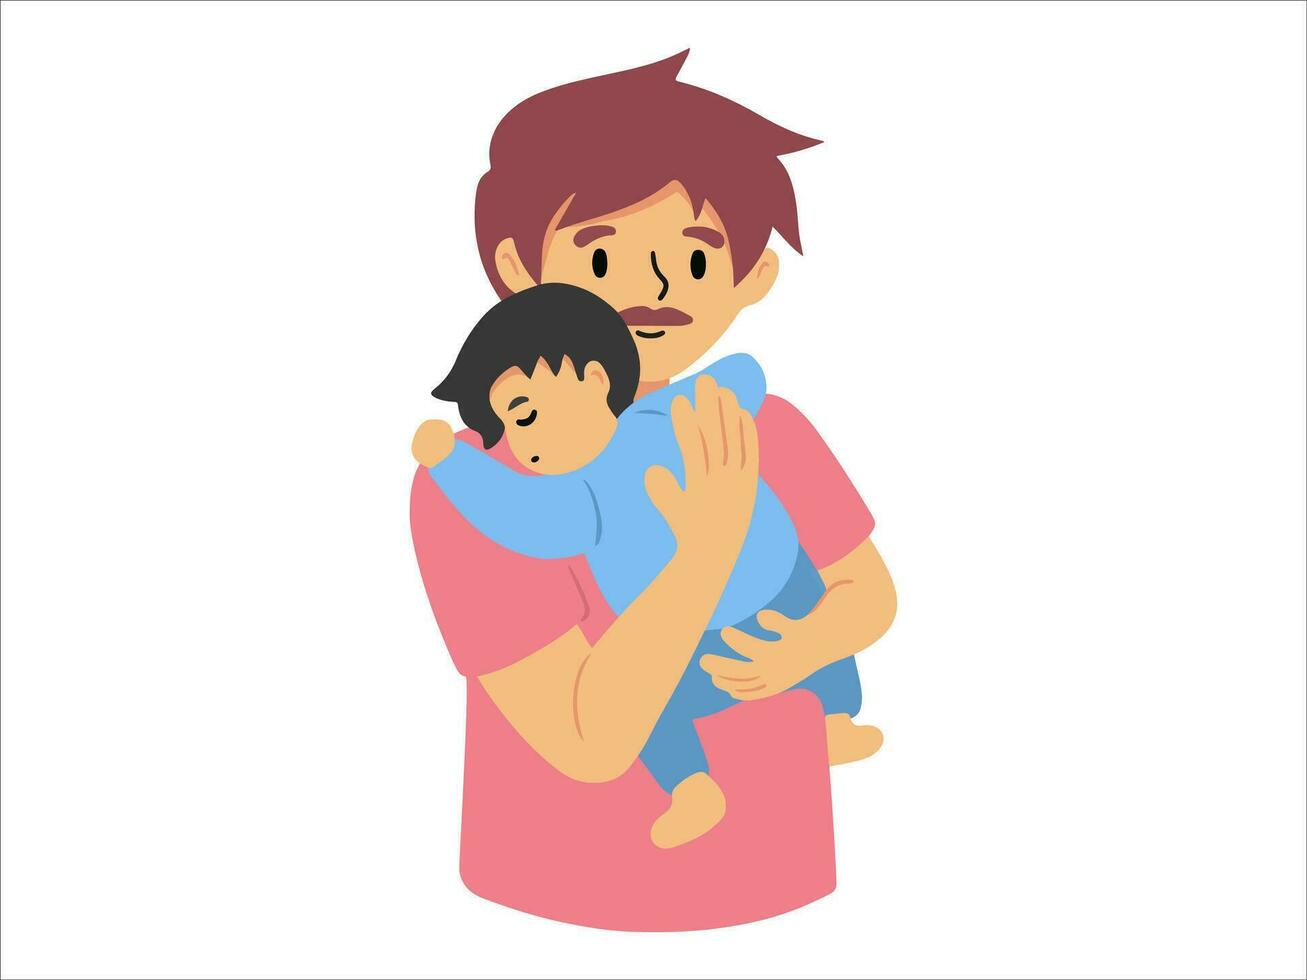 Dad holding baby or People Character illustration vector